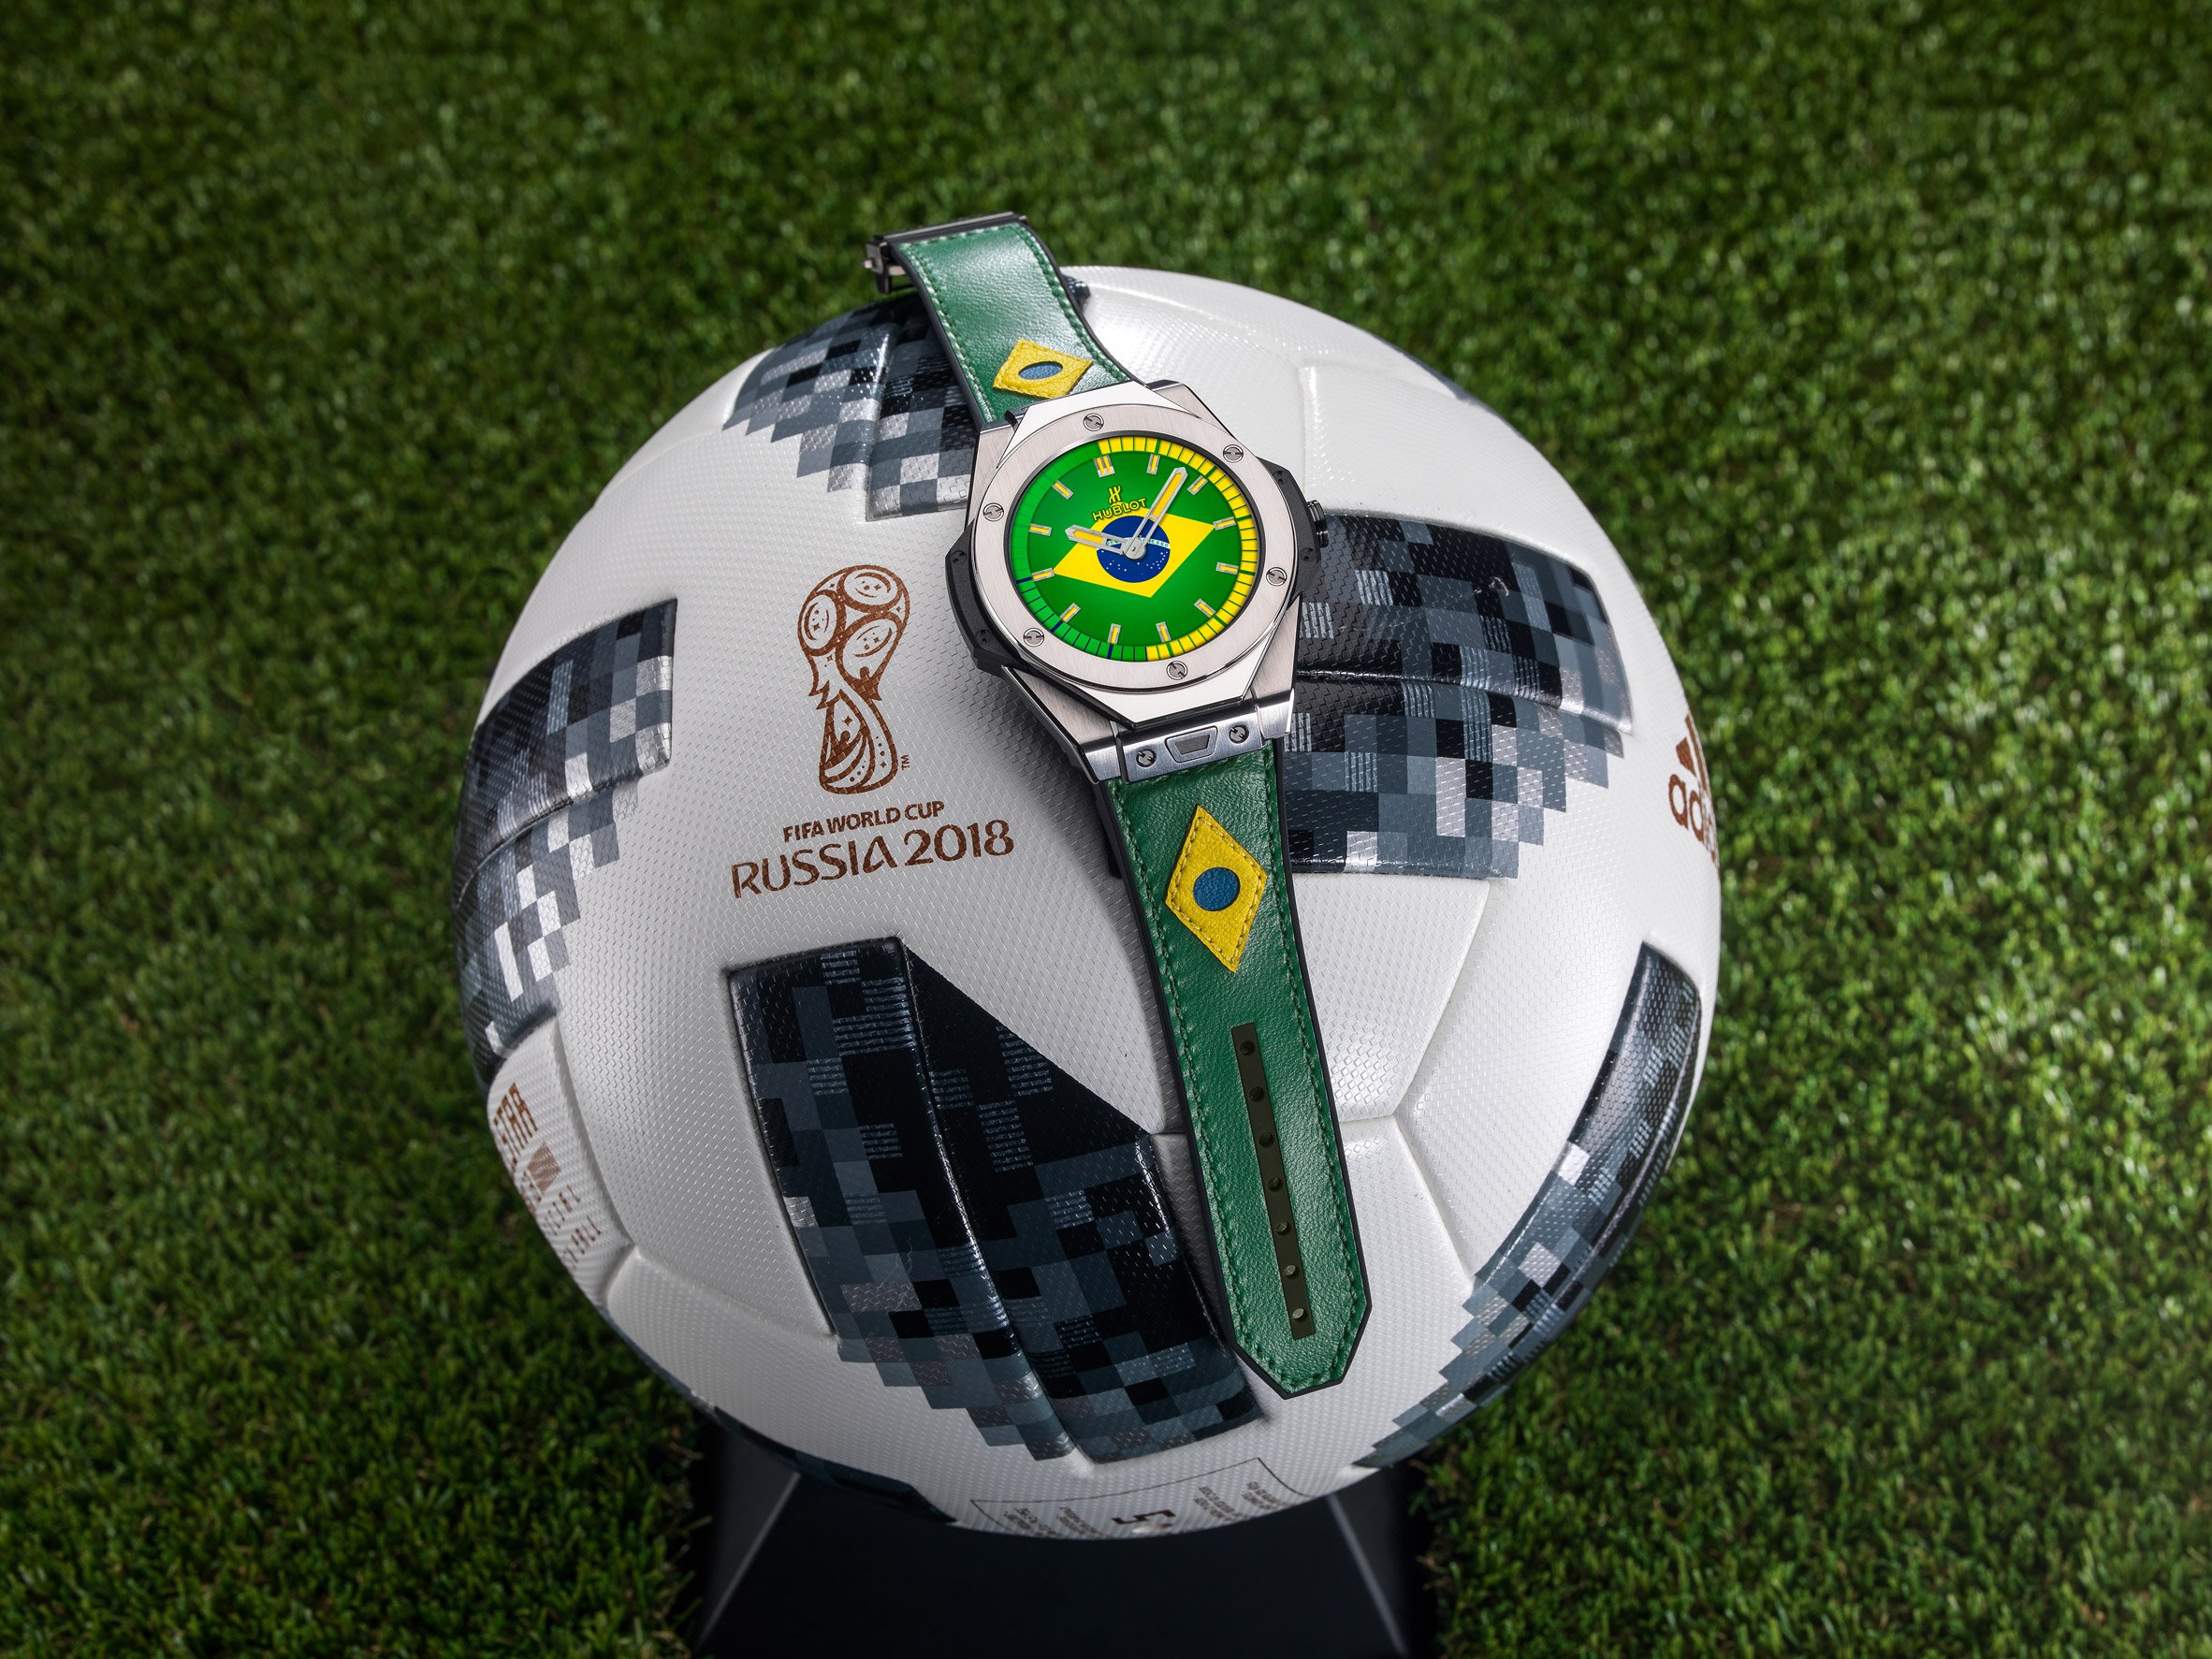 Hublot's first smartwatch to be used referees at World Cup